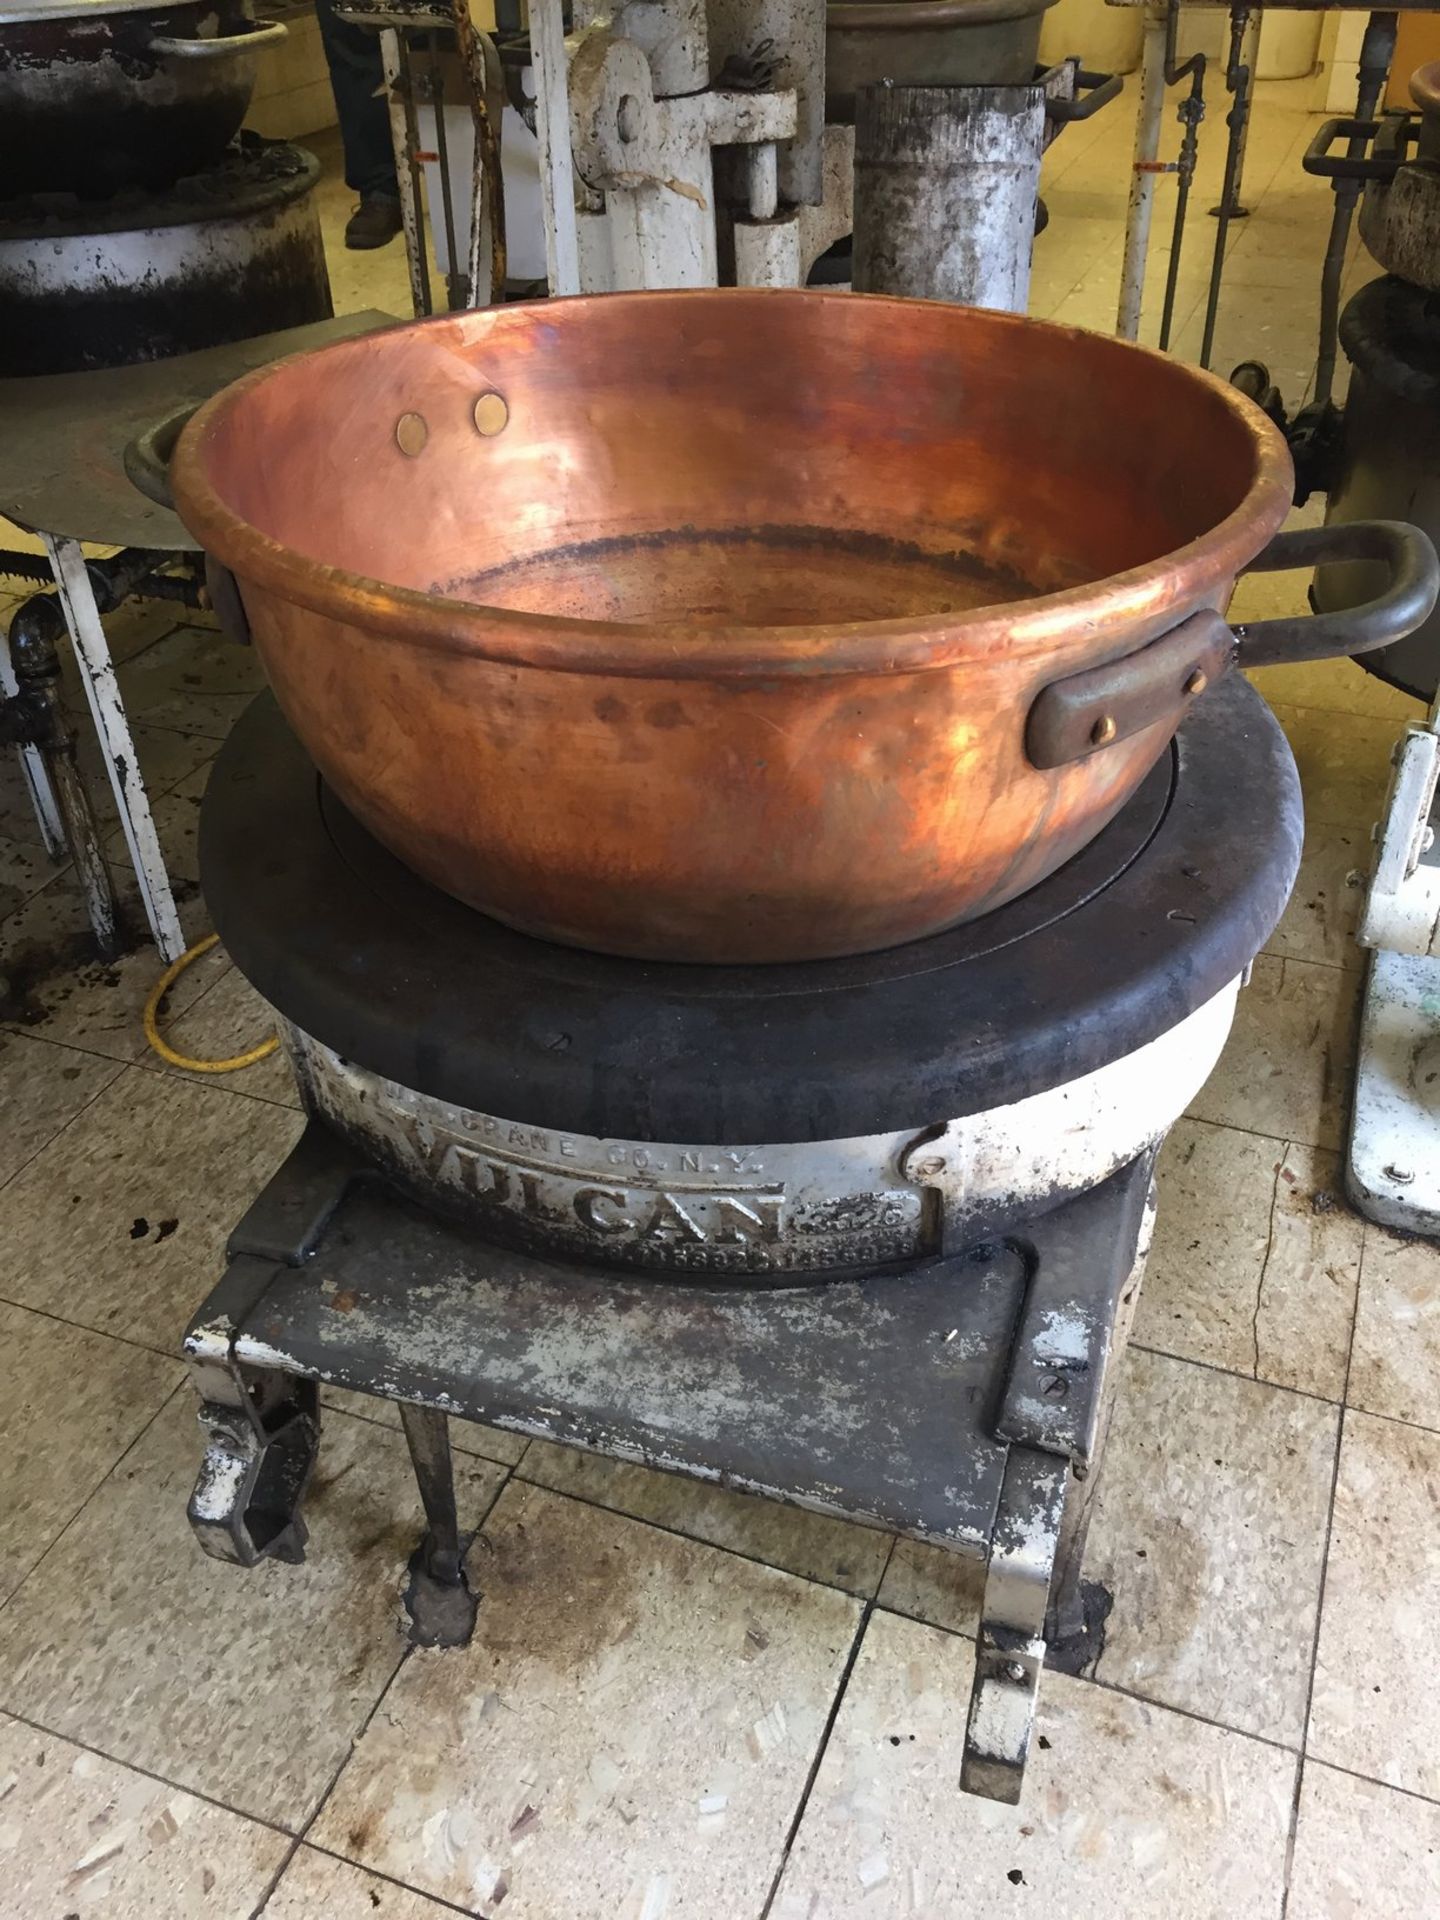 Vulcan Candy stove with 20" diameter x 11" copper kettle